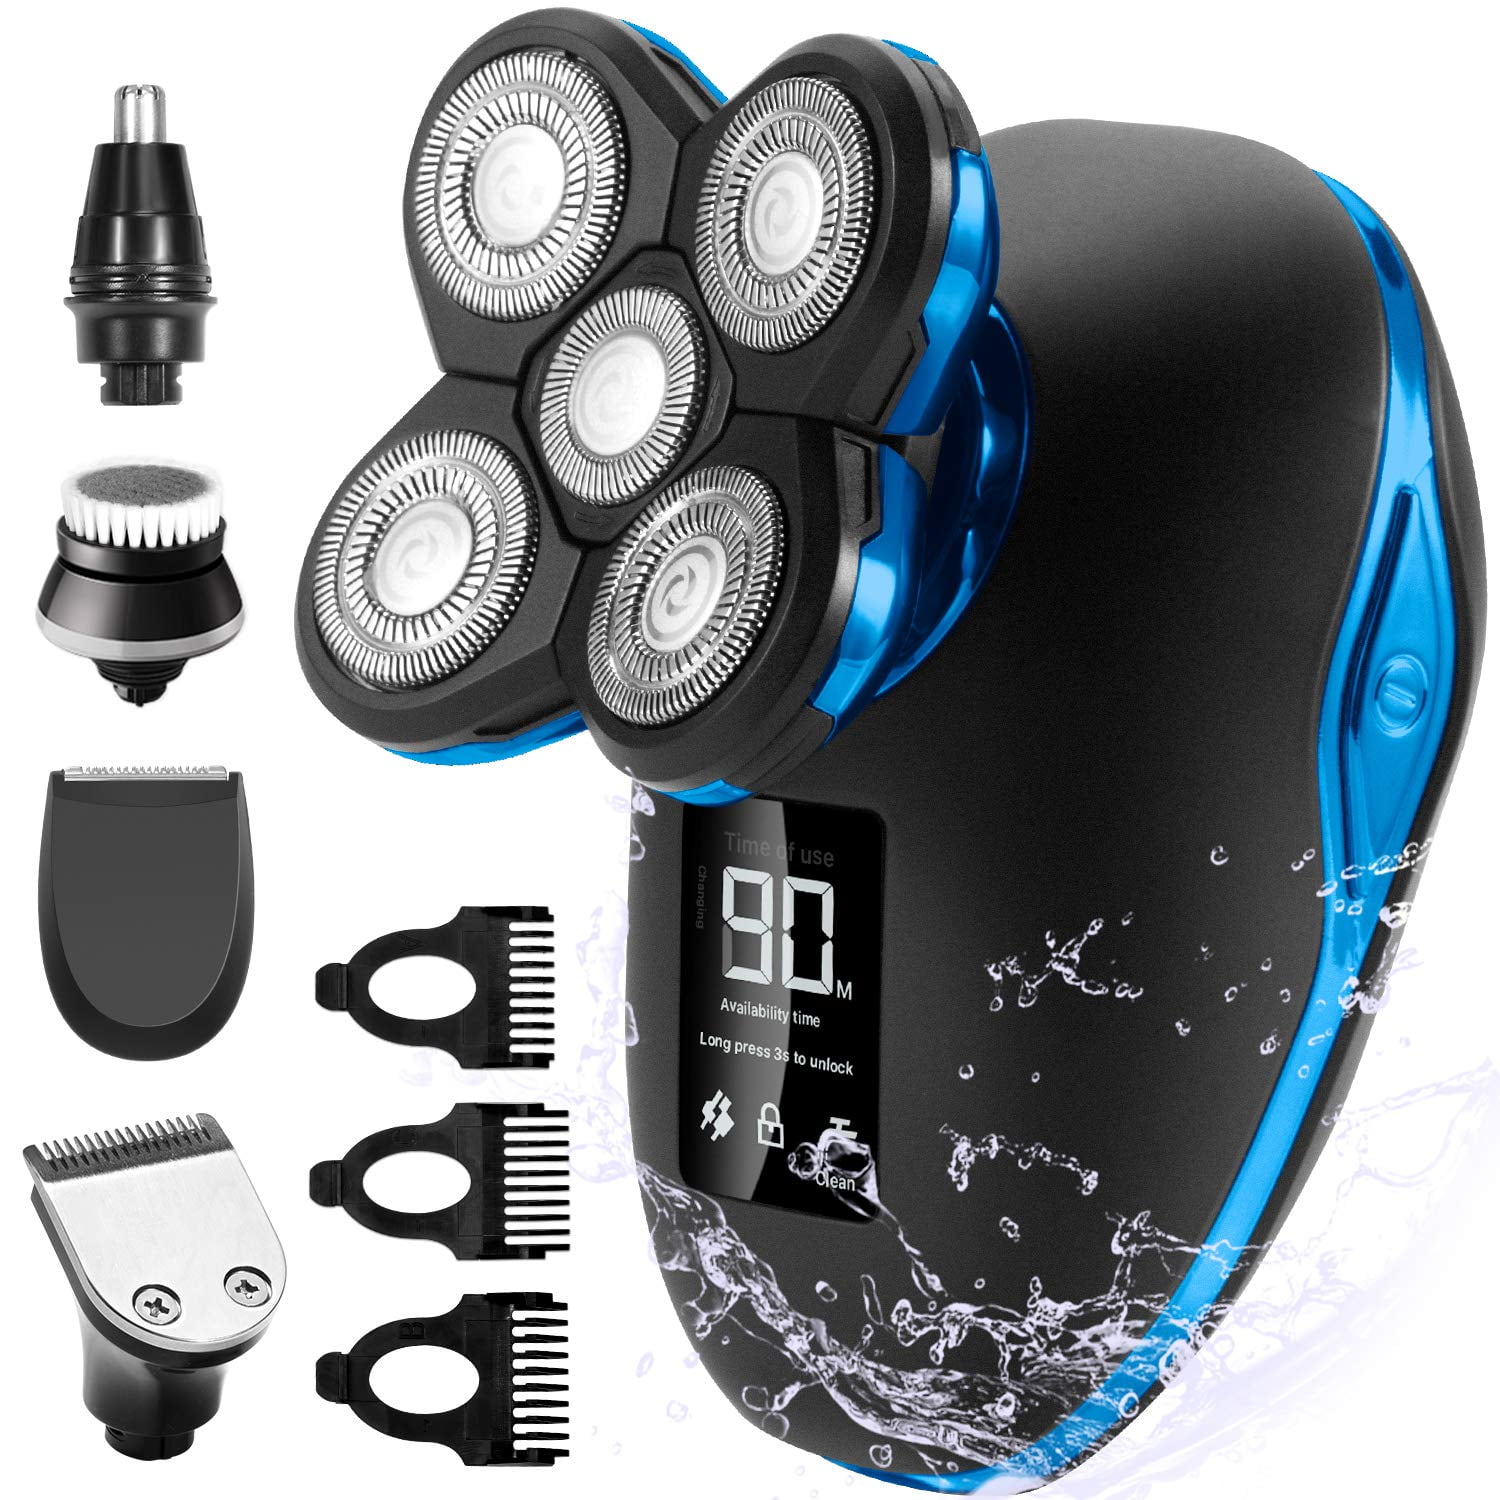 Head Shavers for Bald Men Wet Dry Electric Razor Bald Head Shaver Rotary  Cordless Hair Clippers Nose Hair Trimmer Waterproof USB Rechargeable with  4D Floating 5 Razor Head 